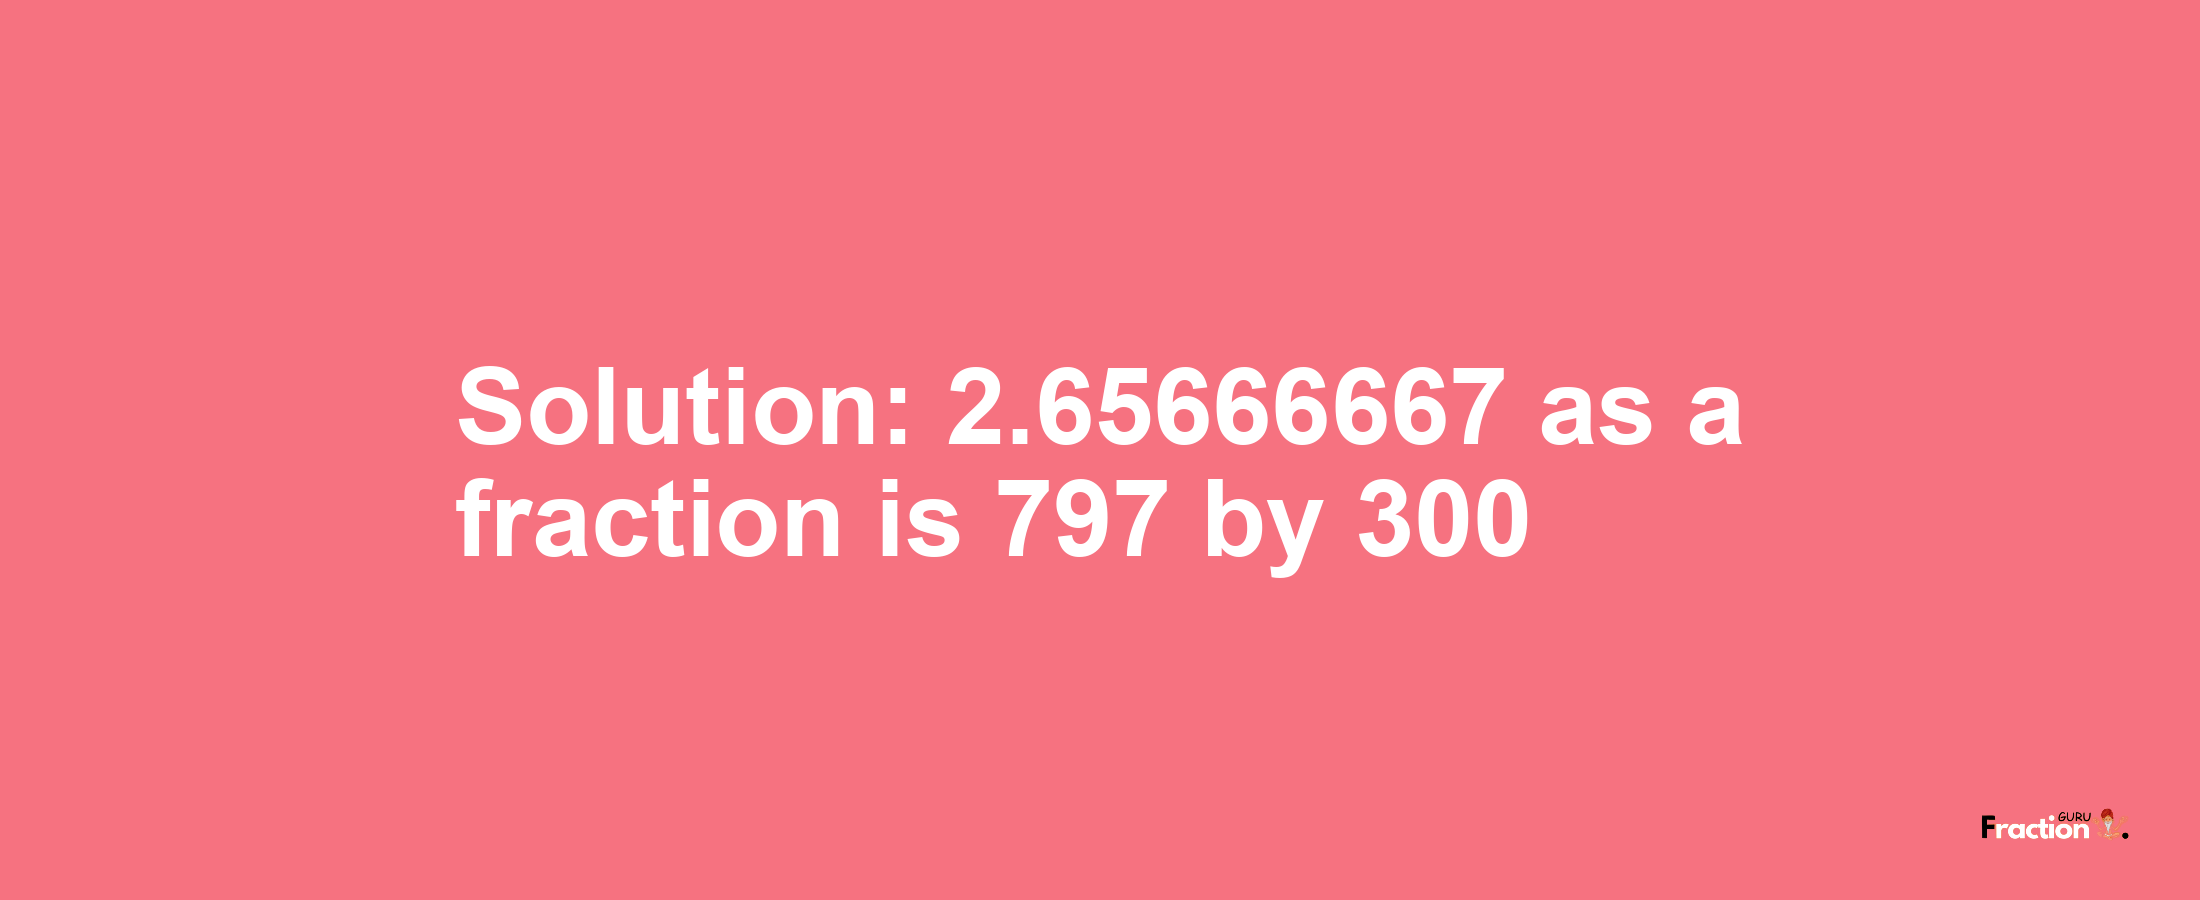 Solution:2.65666667 as a fraction is 797/300